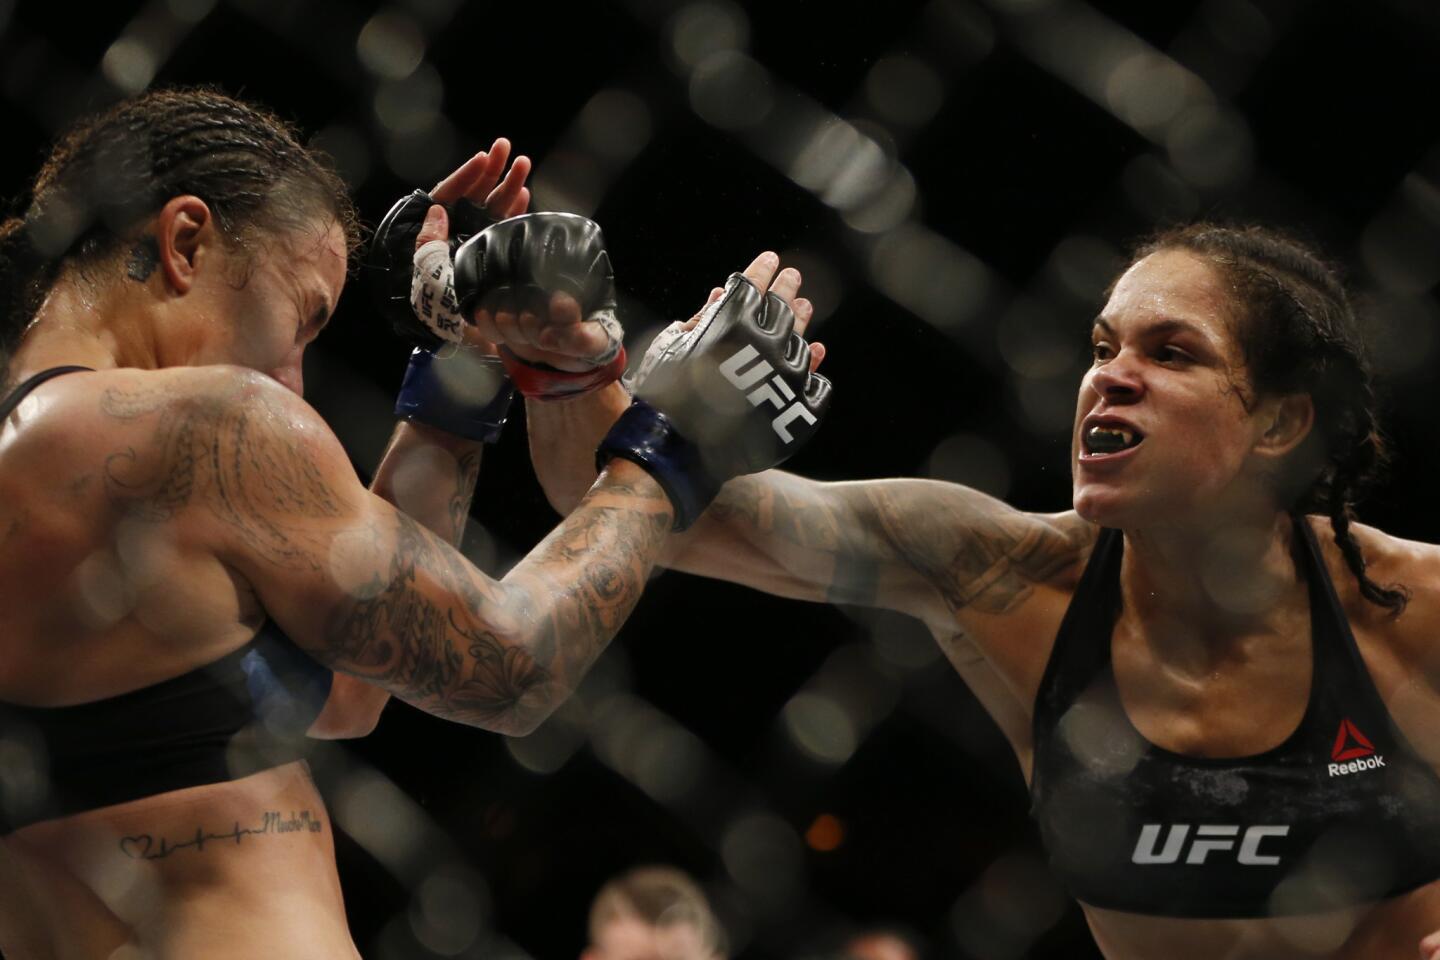 Amanda Nunes, right, from Brazil, fights Raquel Pennington, from the United States, during their UFC women's bantamweight mixed martial arts bout in Rio de Janeiro, Brazil, early Sunday, May 13, 2018. (AP Photo/Leo Correa)